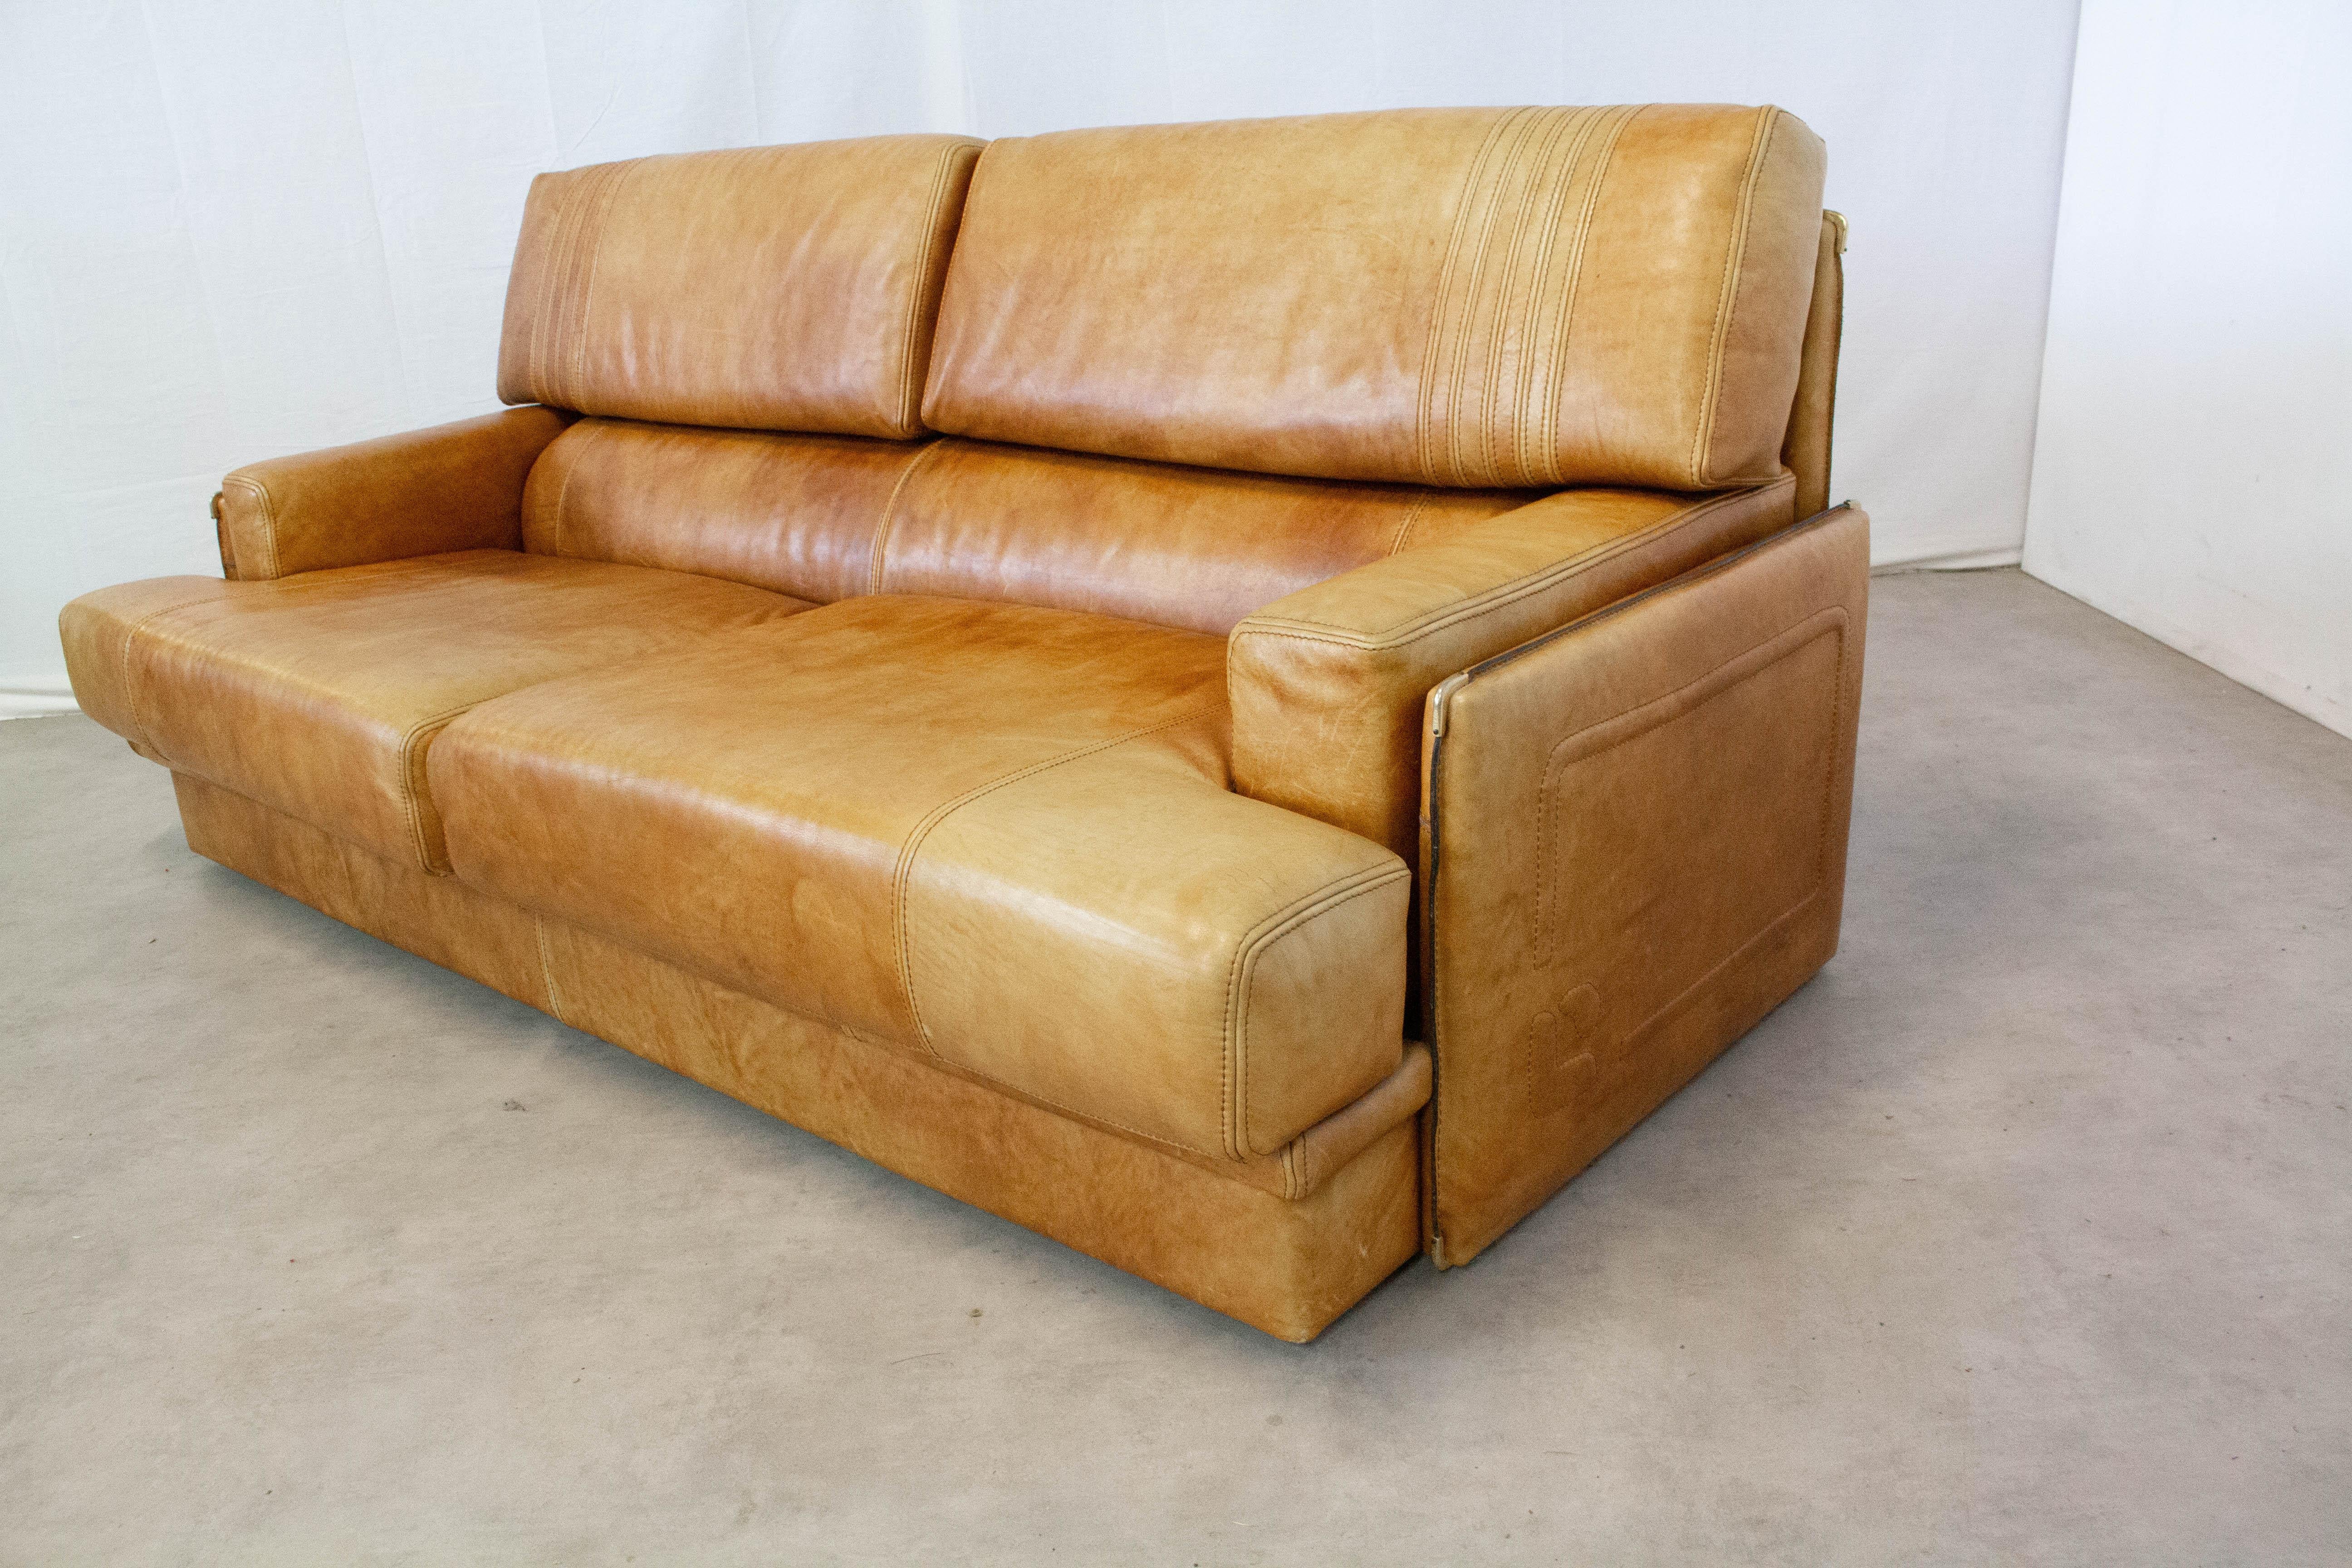 Mid-Century Modern Sofa Cognac Leather, MarCo Milisich for Baxter Arcon, 1970